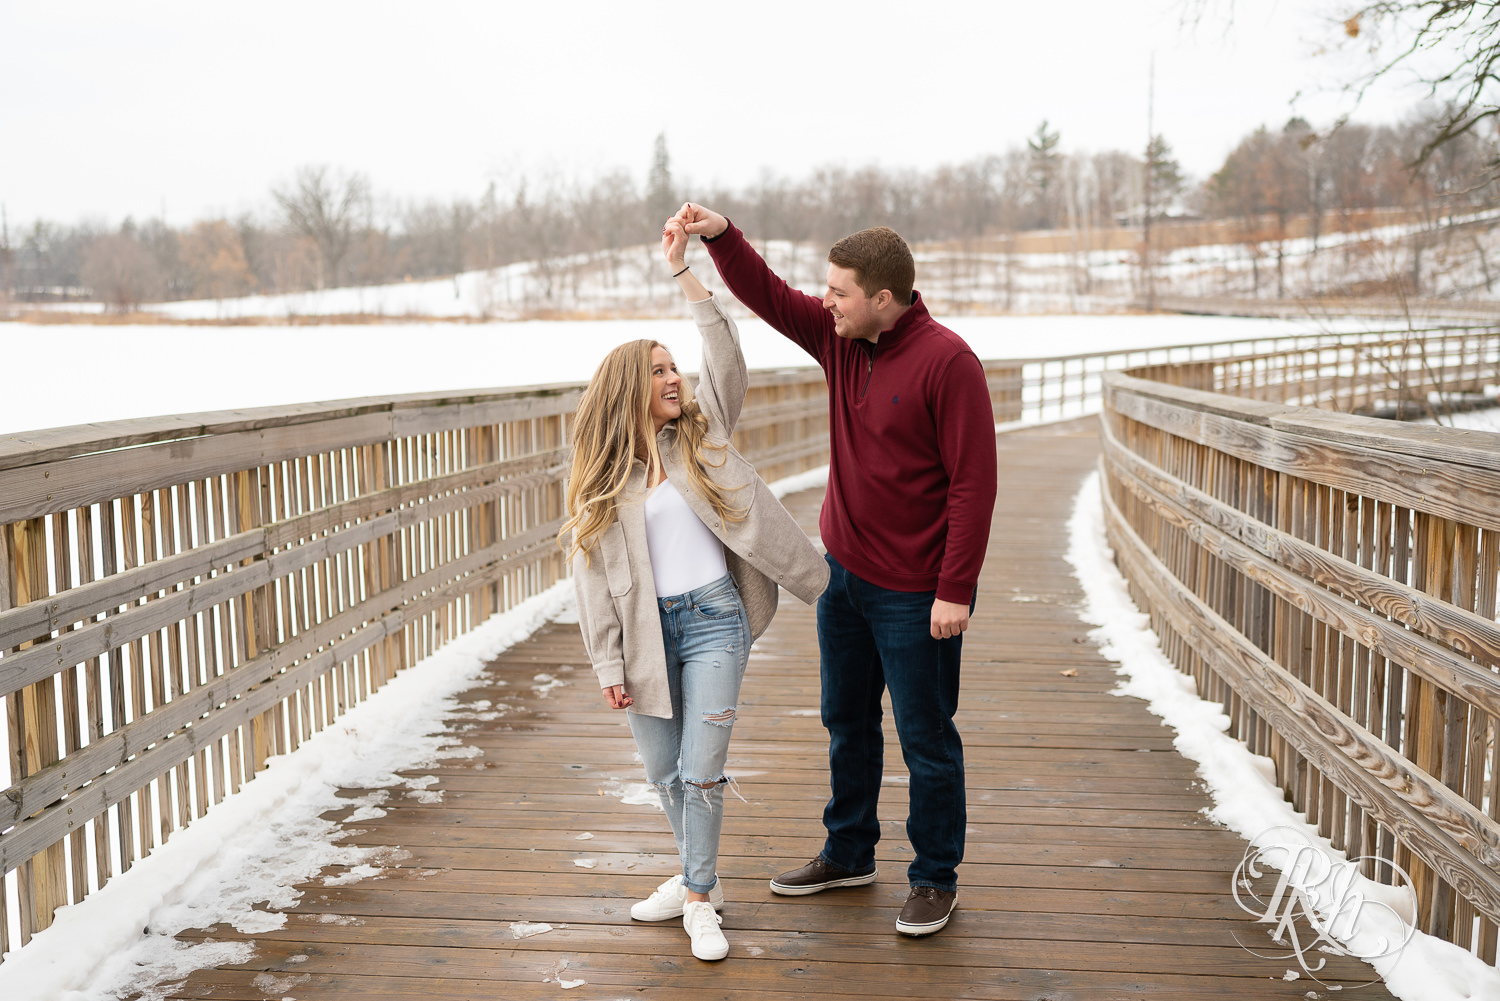 Man spins woman on a bridge in winter engagement photo.